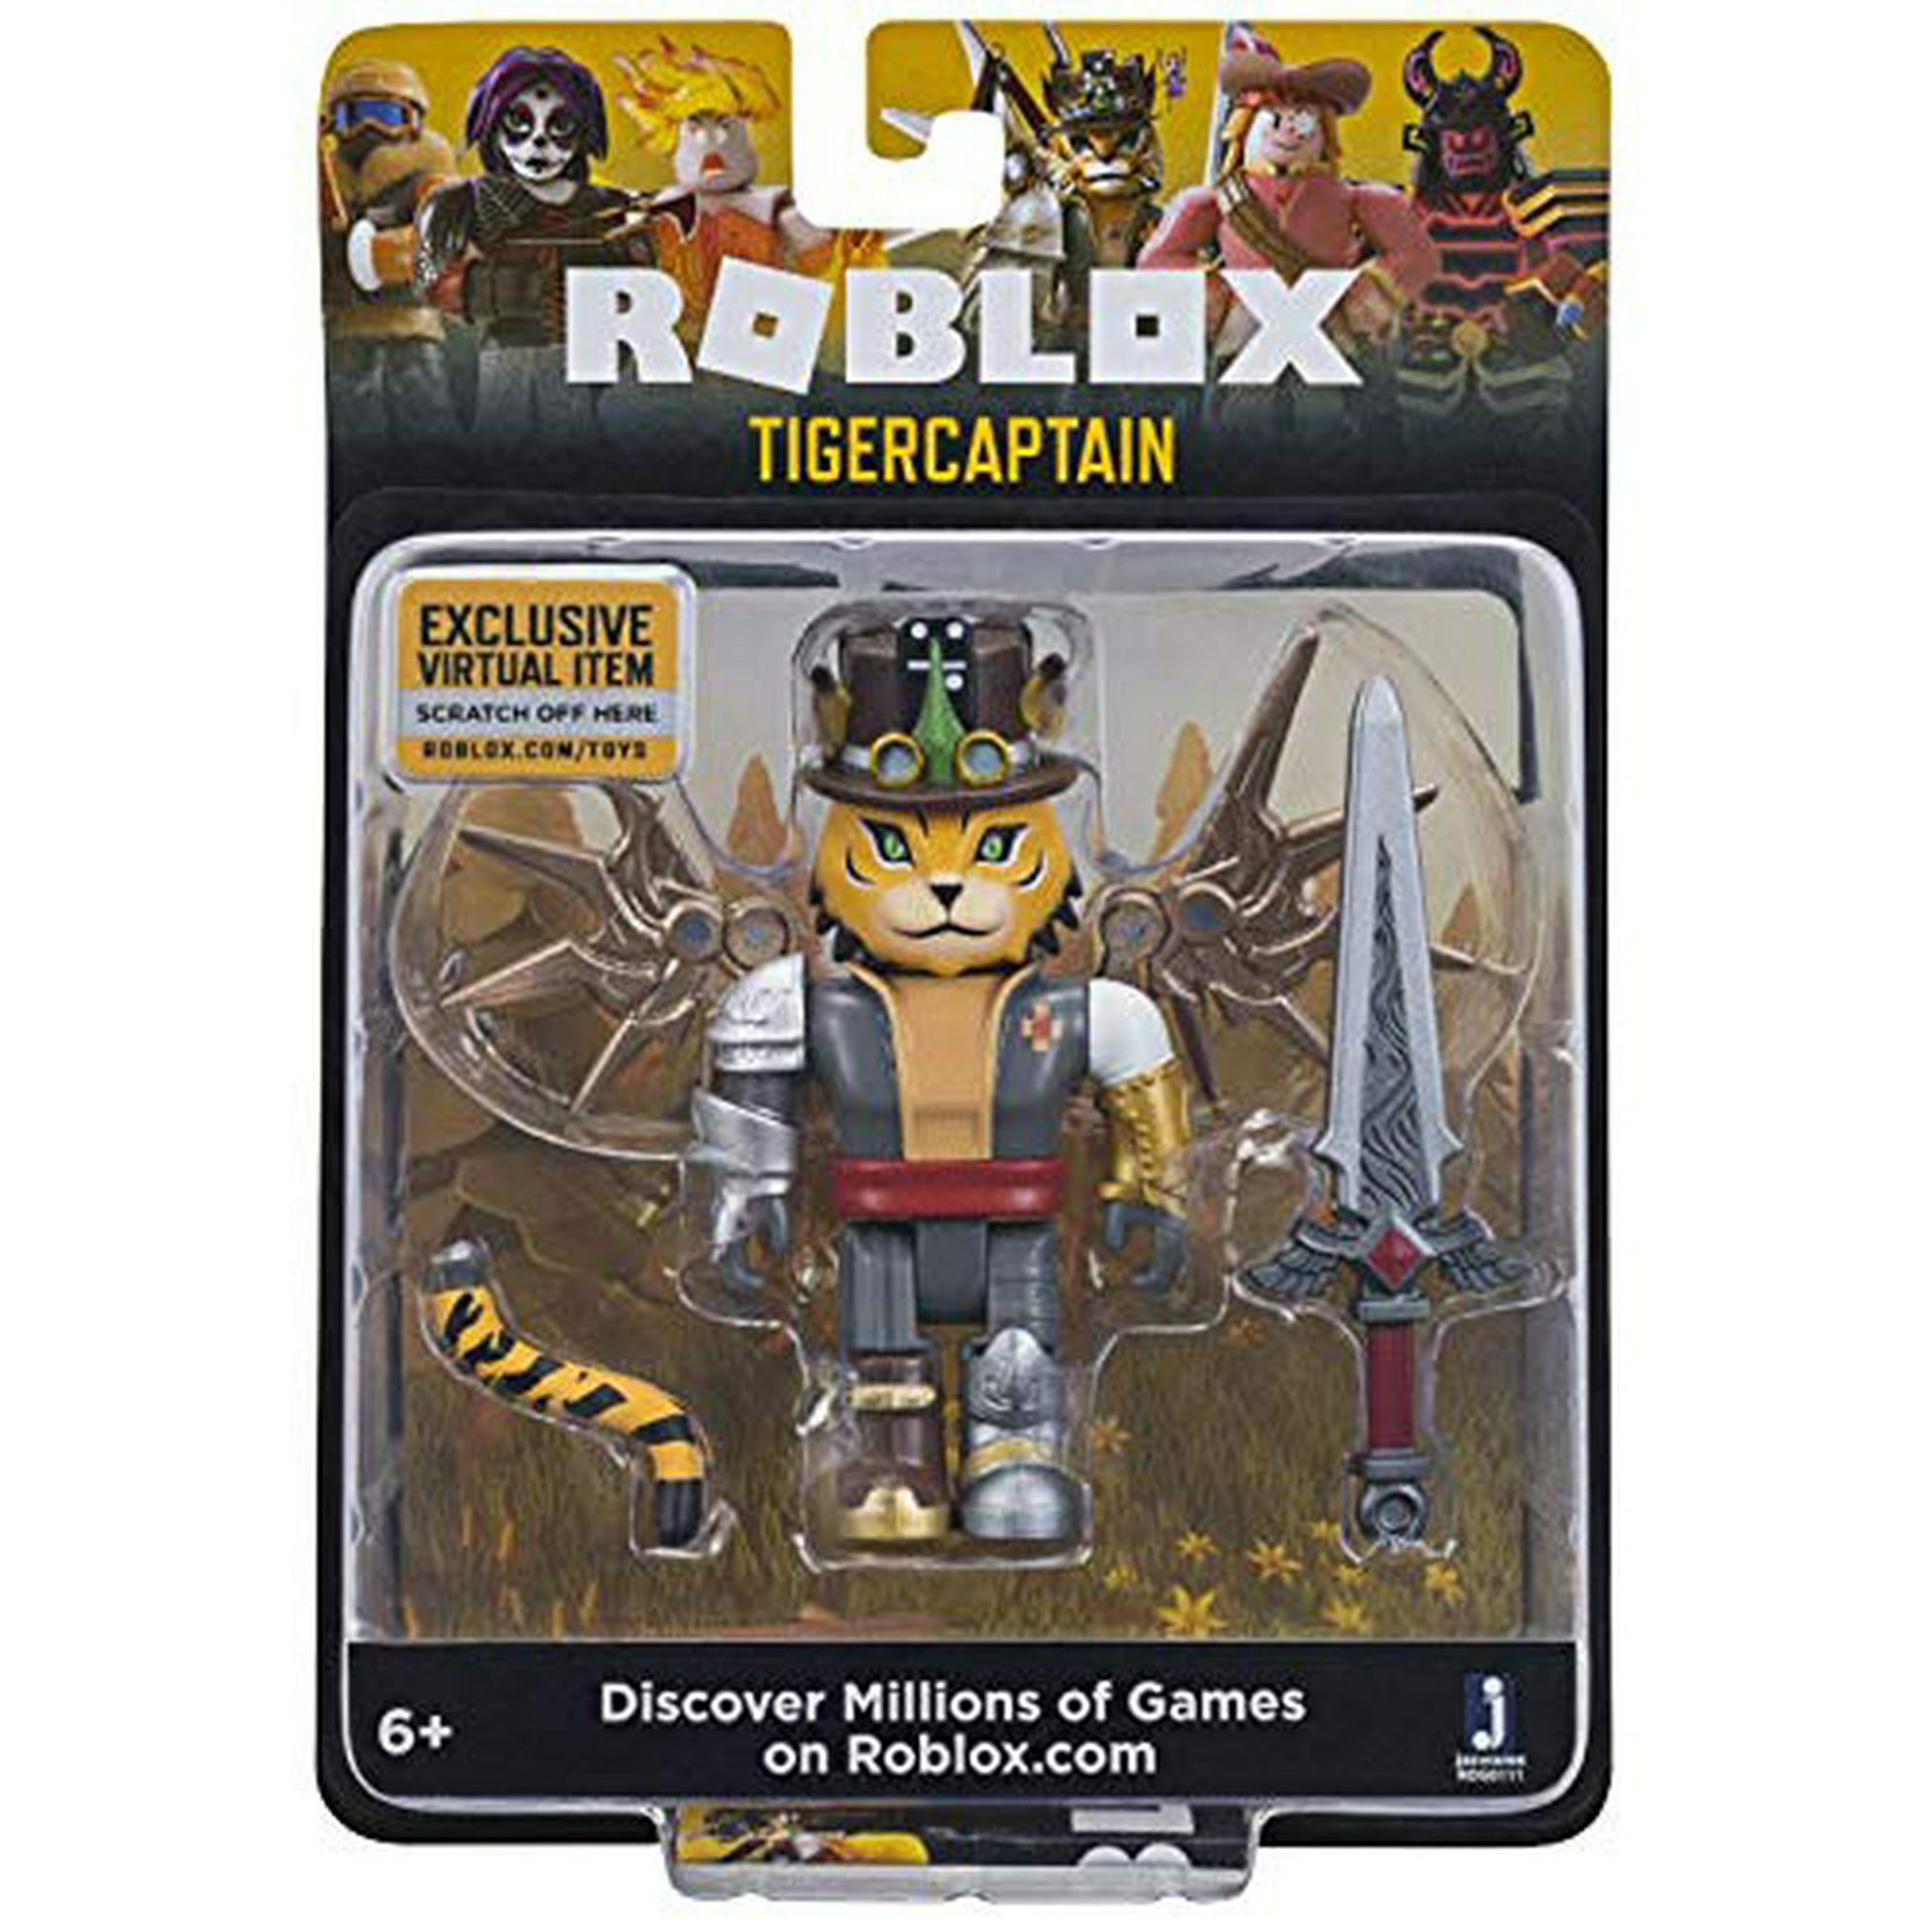 Roblox Tigercaptain 3 Inch Figure With Exclusive Virtual Item Code